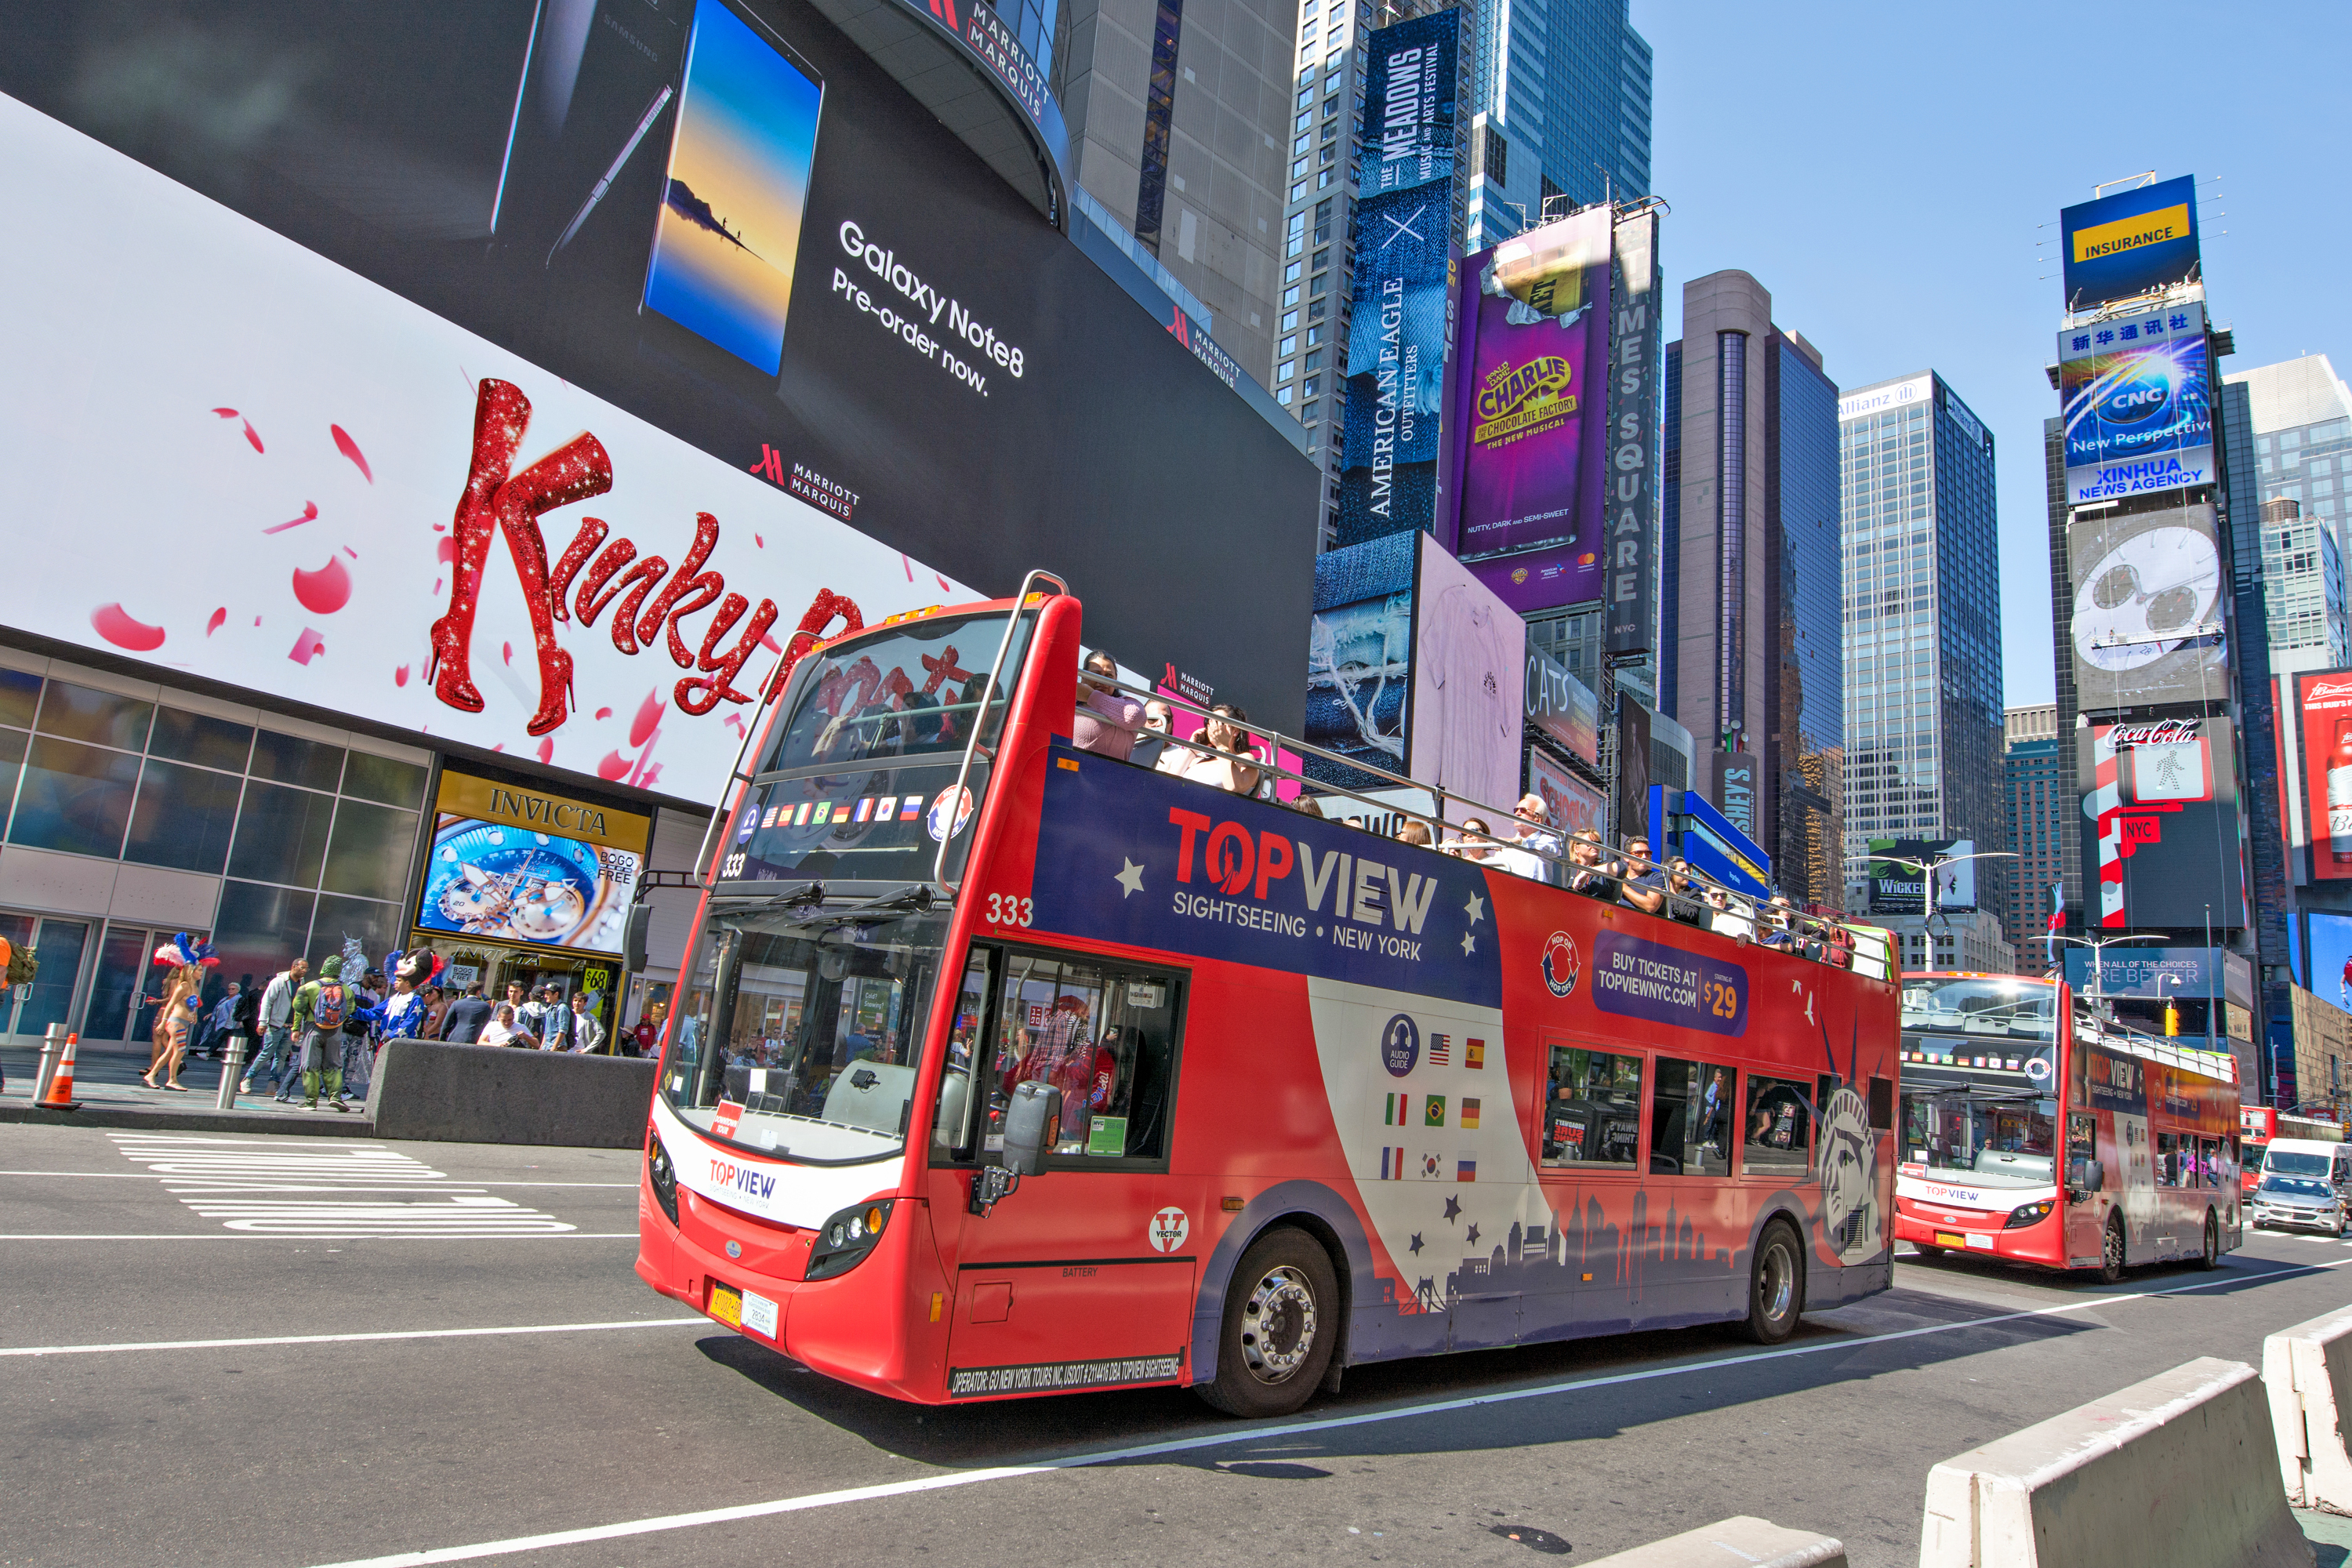 A touring bus driving through the middle of Times Square in New York City.